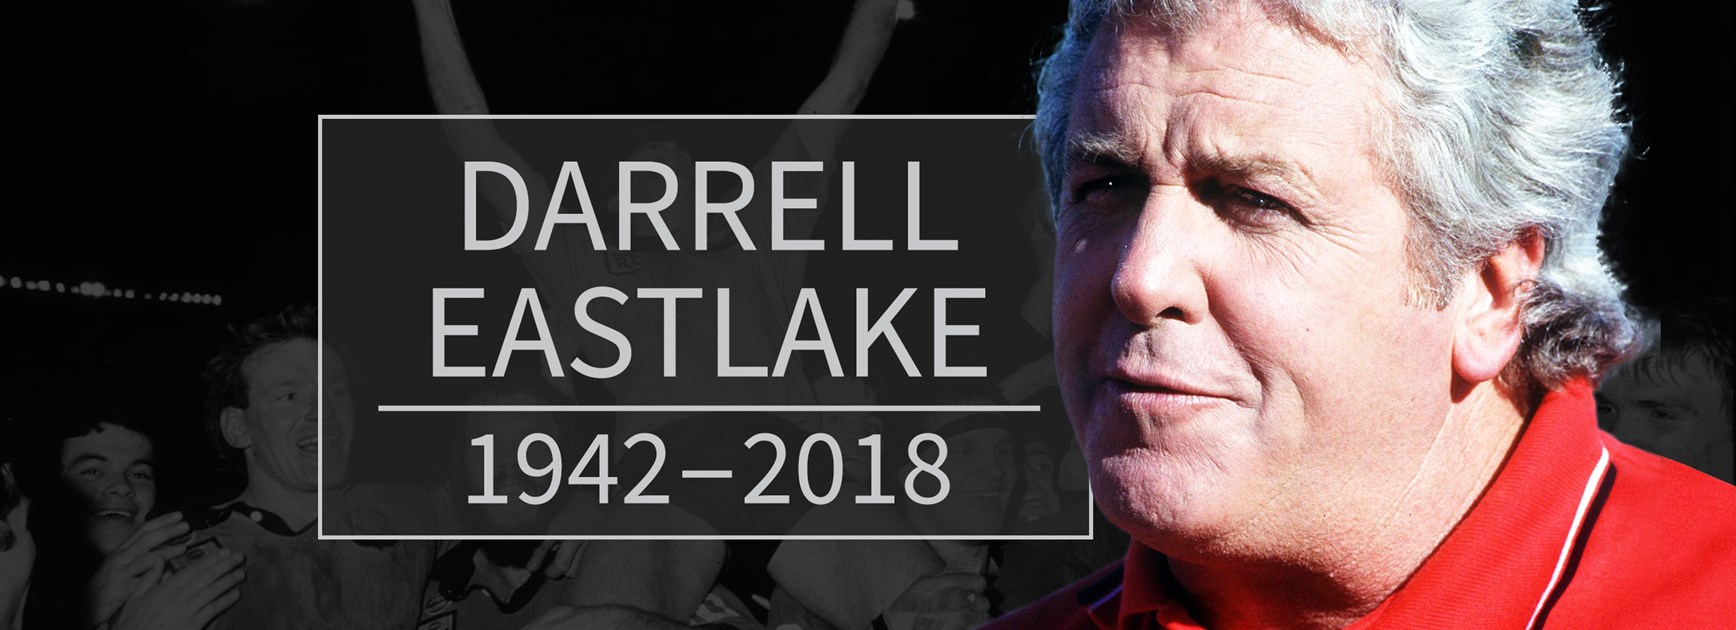 Greats pay tribute to the late Darrell Eastlake